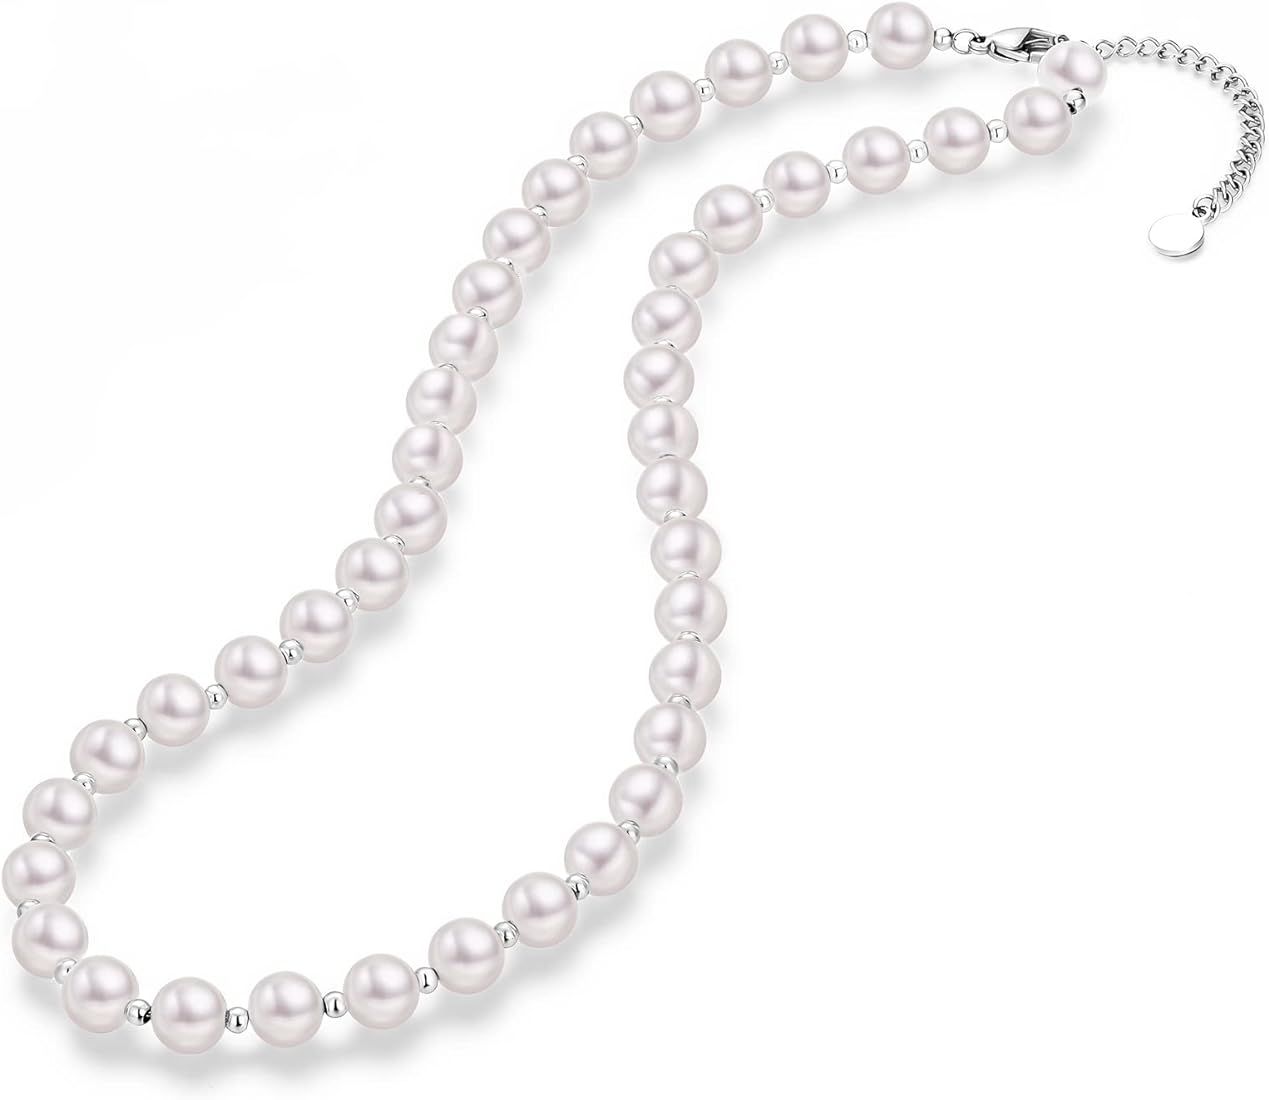 Pearl Necklace for Women,Round Shaped Pearl Strand Necklace 6-8mm Genuine Freshwater Pearl Princess Classic Necklace Choker Bridal Jewelry Gifts for Women Girl Birthday Anniversary 16"+2" Adjustable Chain | Amazon (CA)